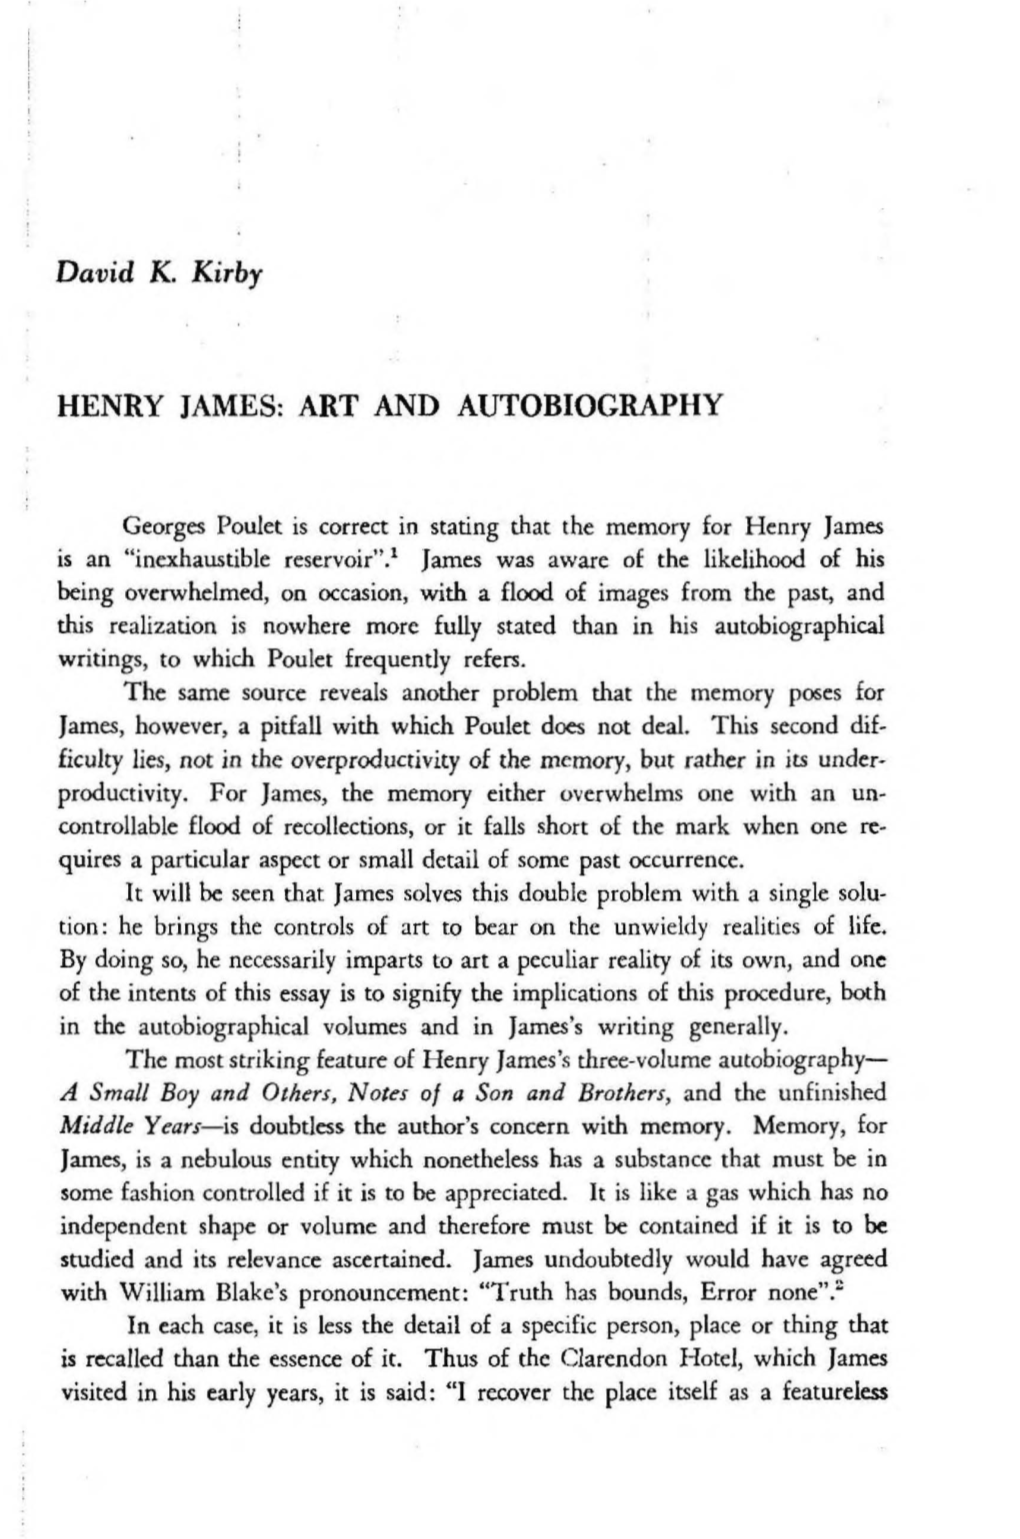 Henry James: Art and Autobiography